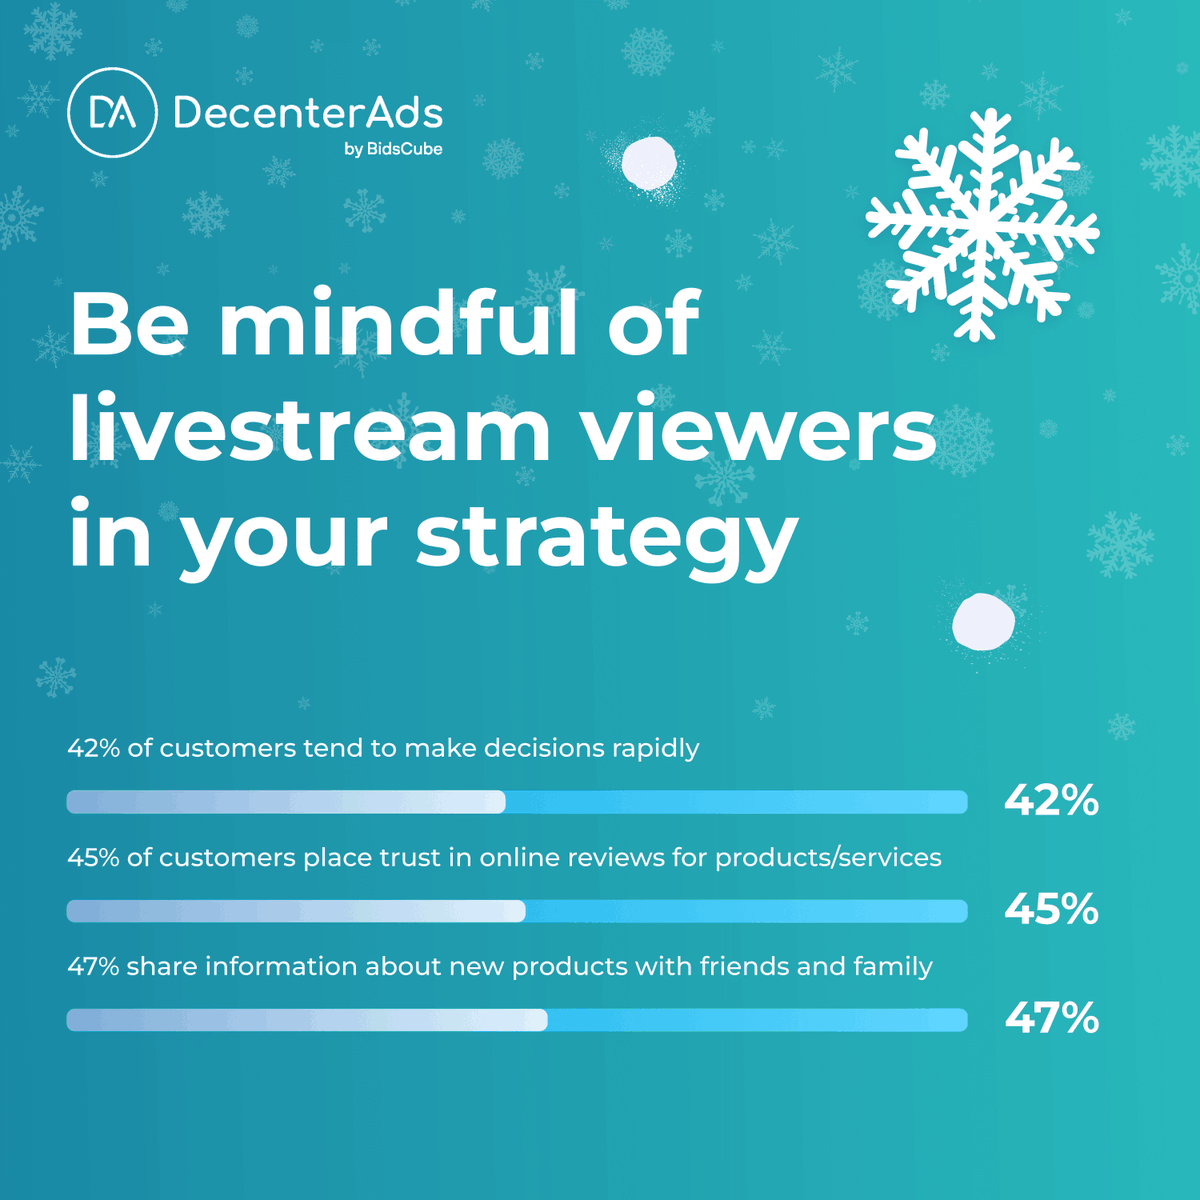 🎅🏽This holiday season, programmatic advertising is at a critical juncture. Check out the latest stats we've gathered on what Gen X & Millennials are looking for. #decenterads #fast #adtech #advertisement #digitalgrowth #advertising #connectedtv #christmas #HolidayAdvertising